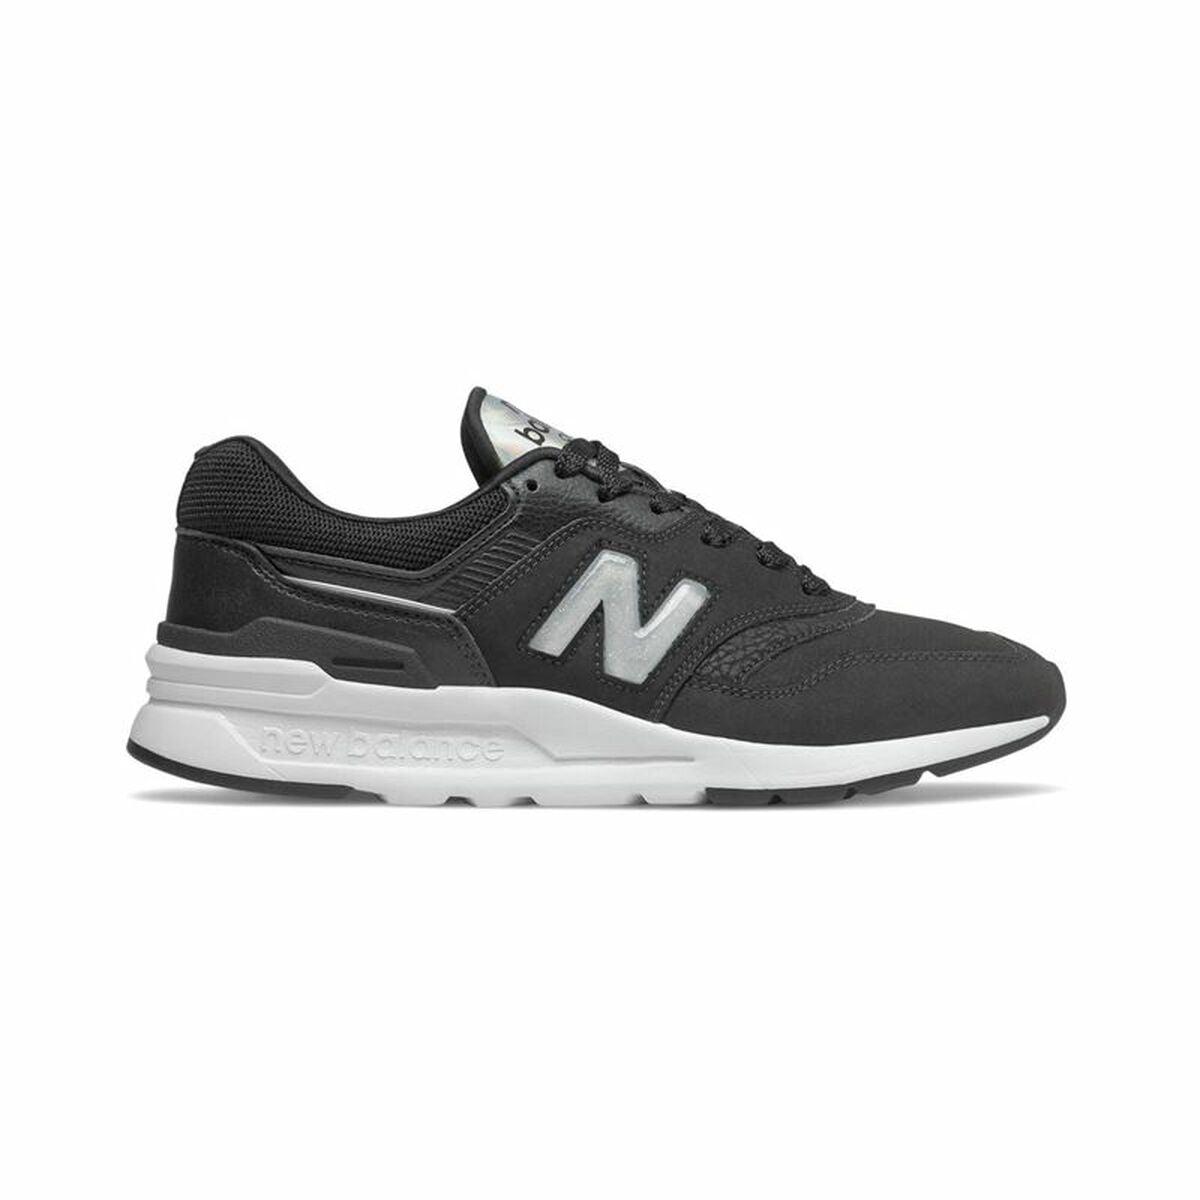 New Balance Sports Trainers For Women 997 Lady Black | Lyst